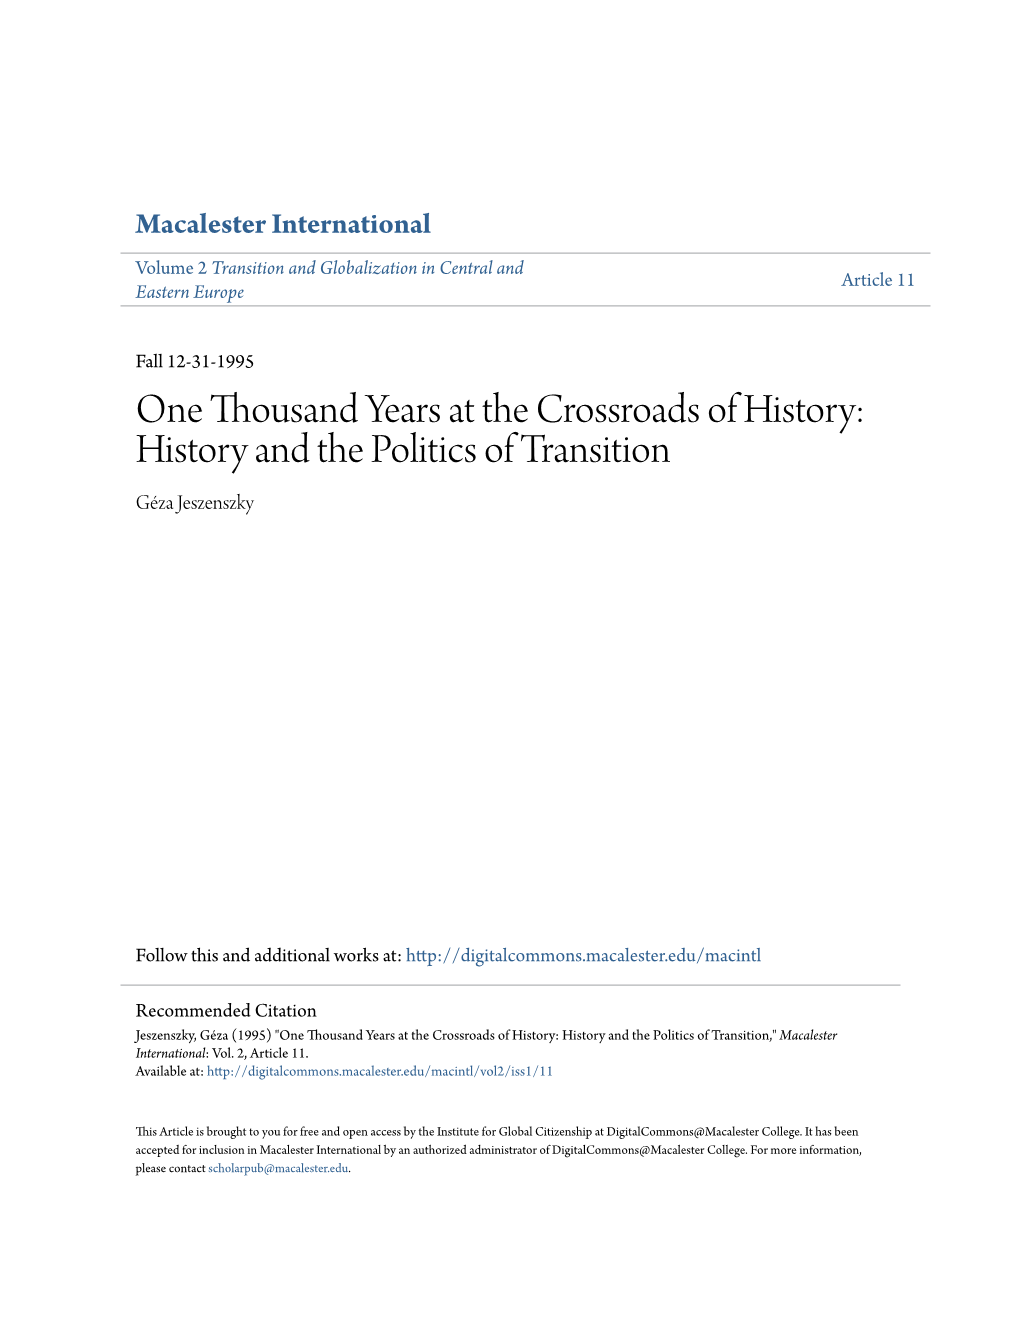 One Thousand Years at the Crossroads of History: History and the Politics of Transition Géza Jeszenszky